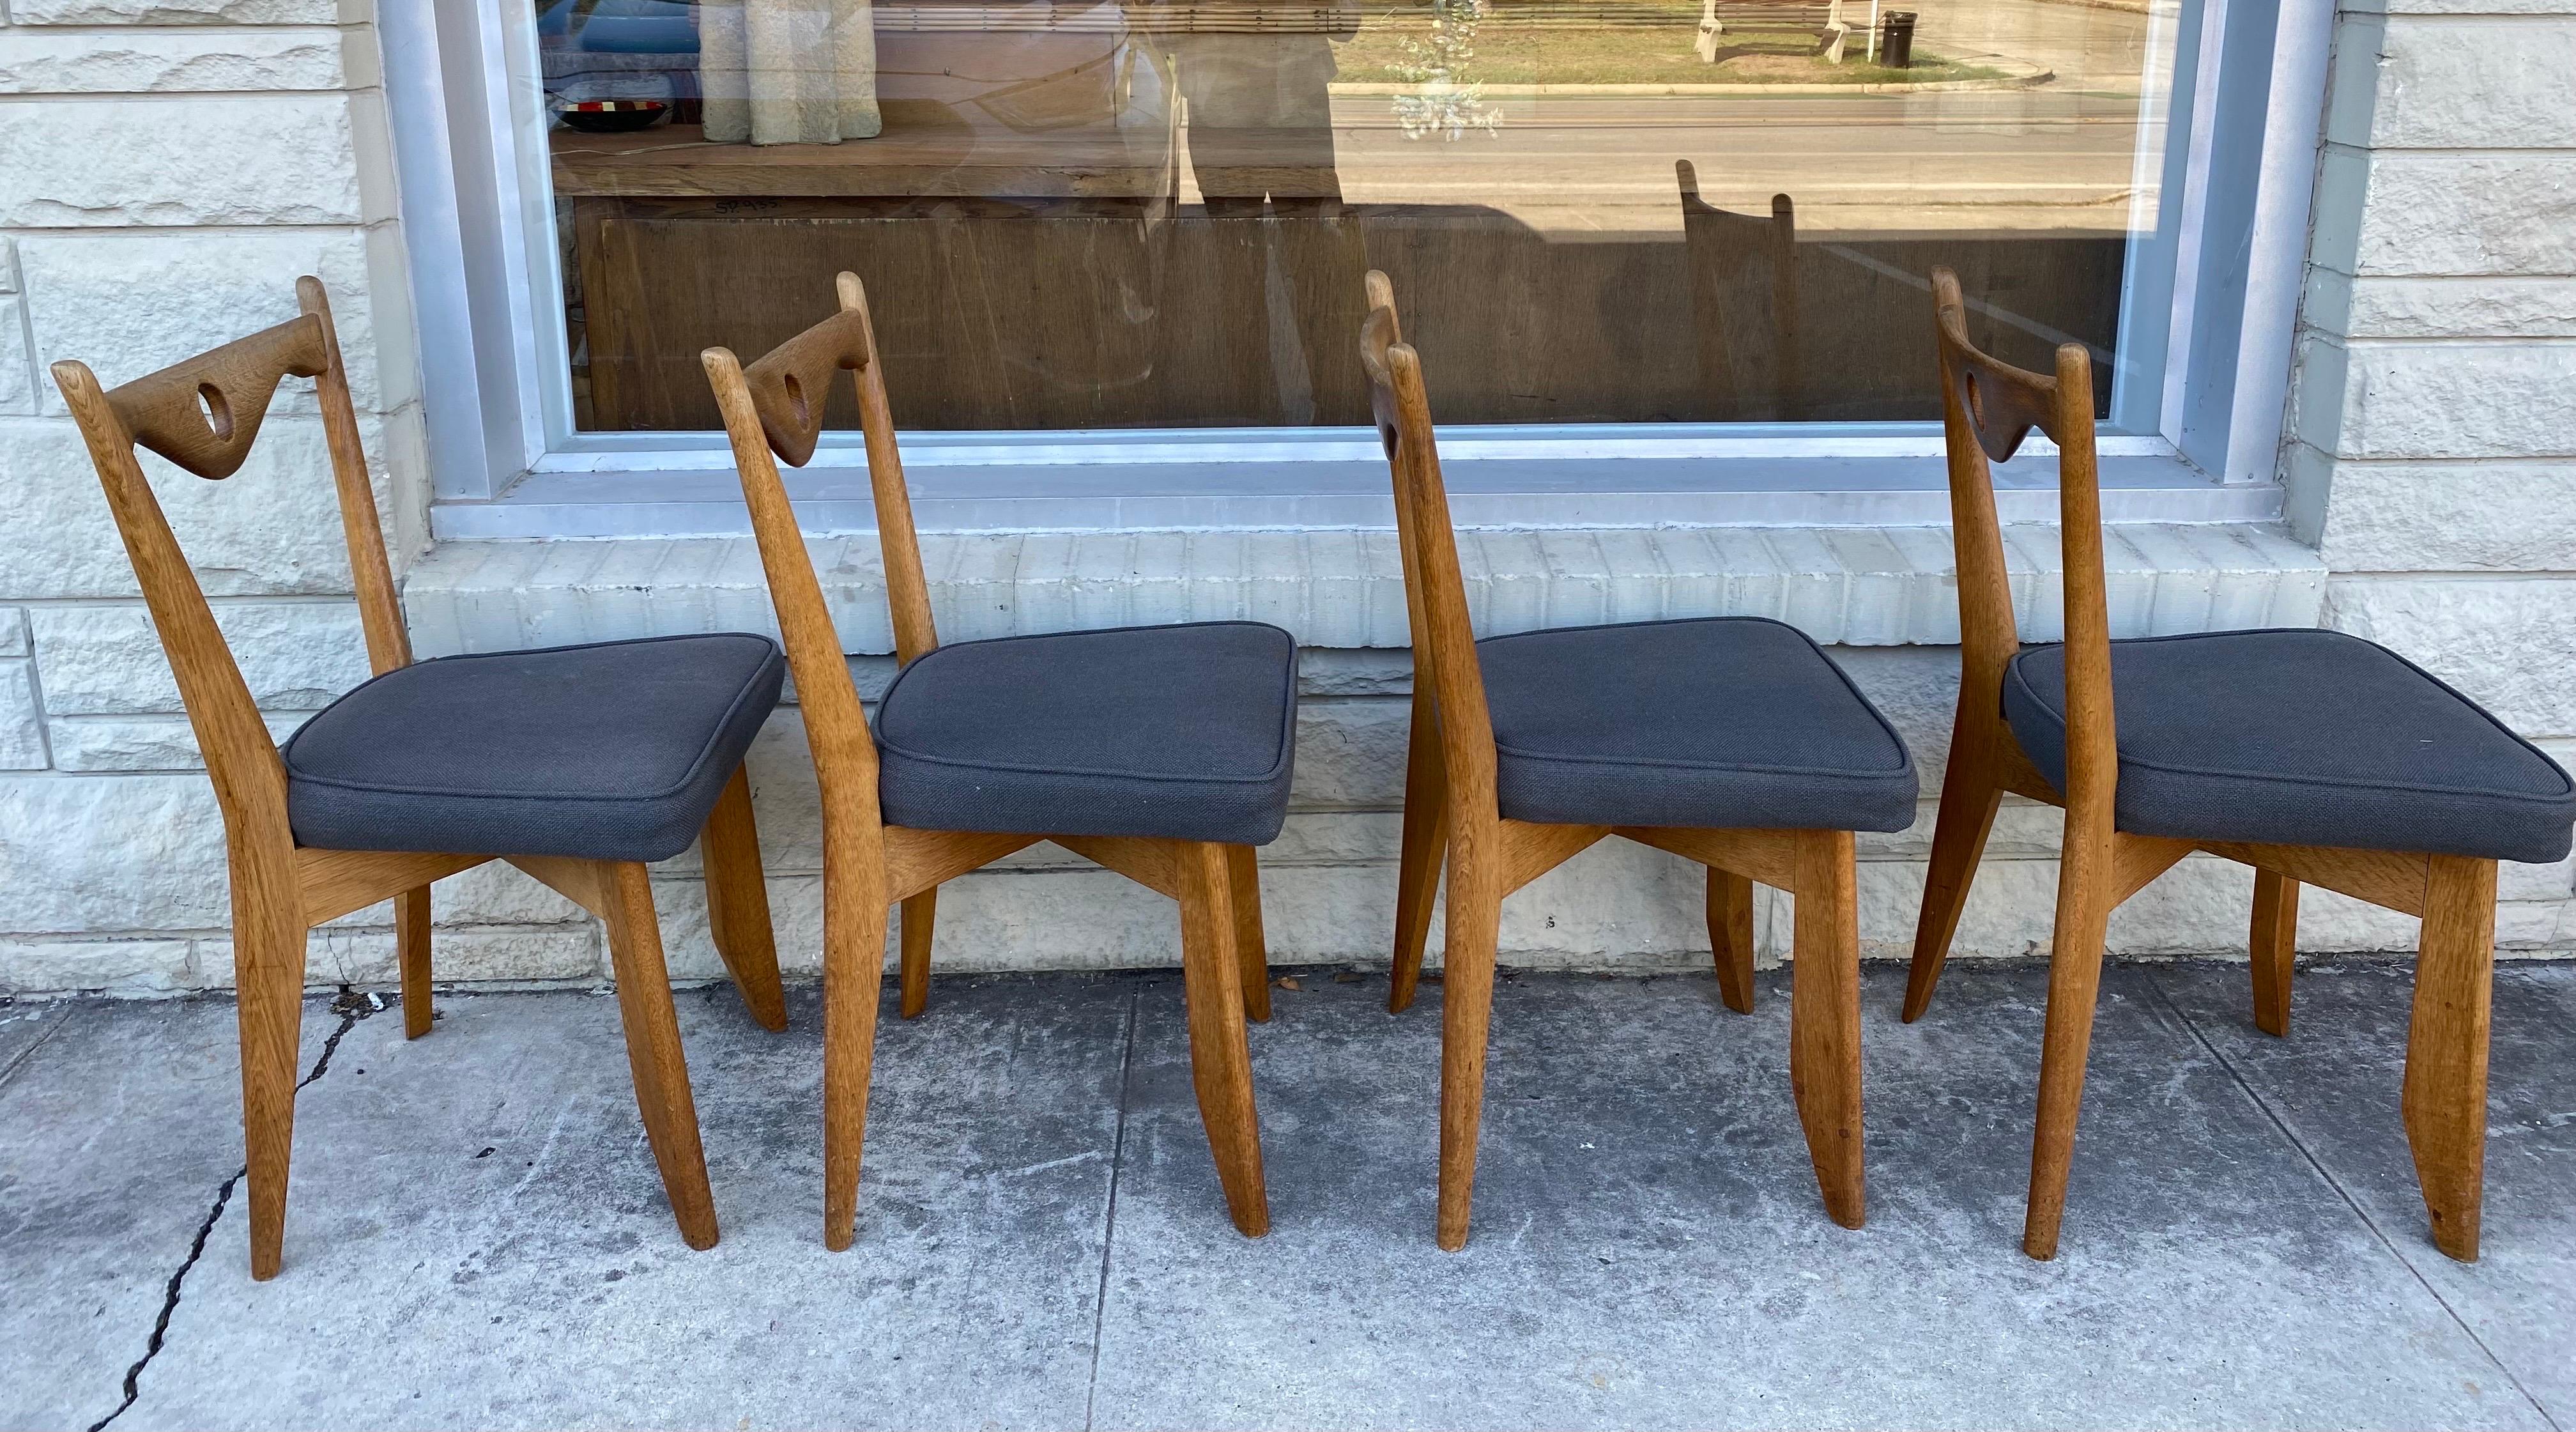 Set of 4 Guillerme et Chambron dining chairs made of solid oak with fabric upholstery in gray, circa 1960s, France. 
Dimensions: 17